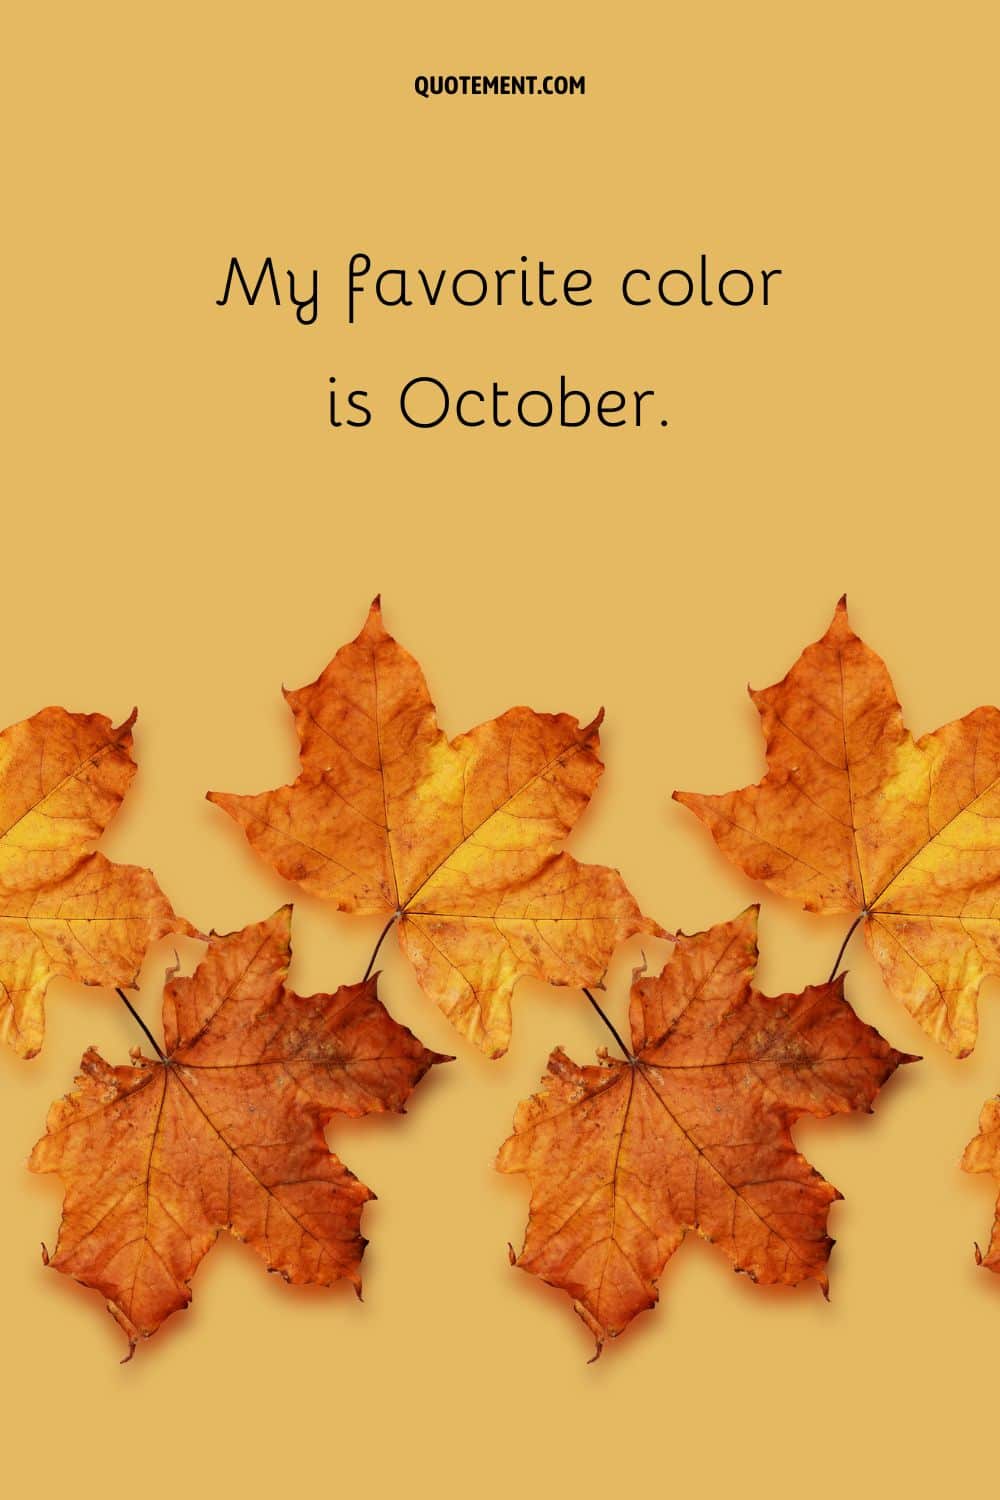 Golden autumn leaves representing the best fall Instagram caption.